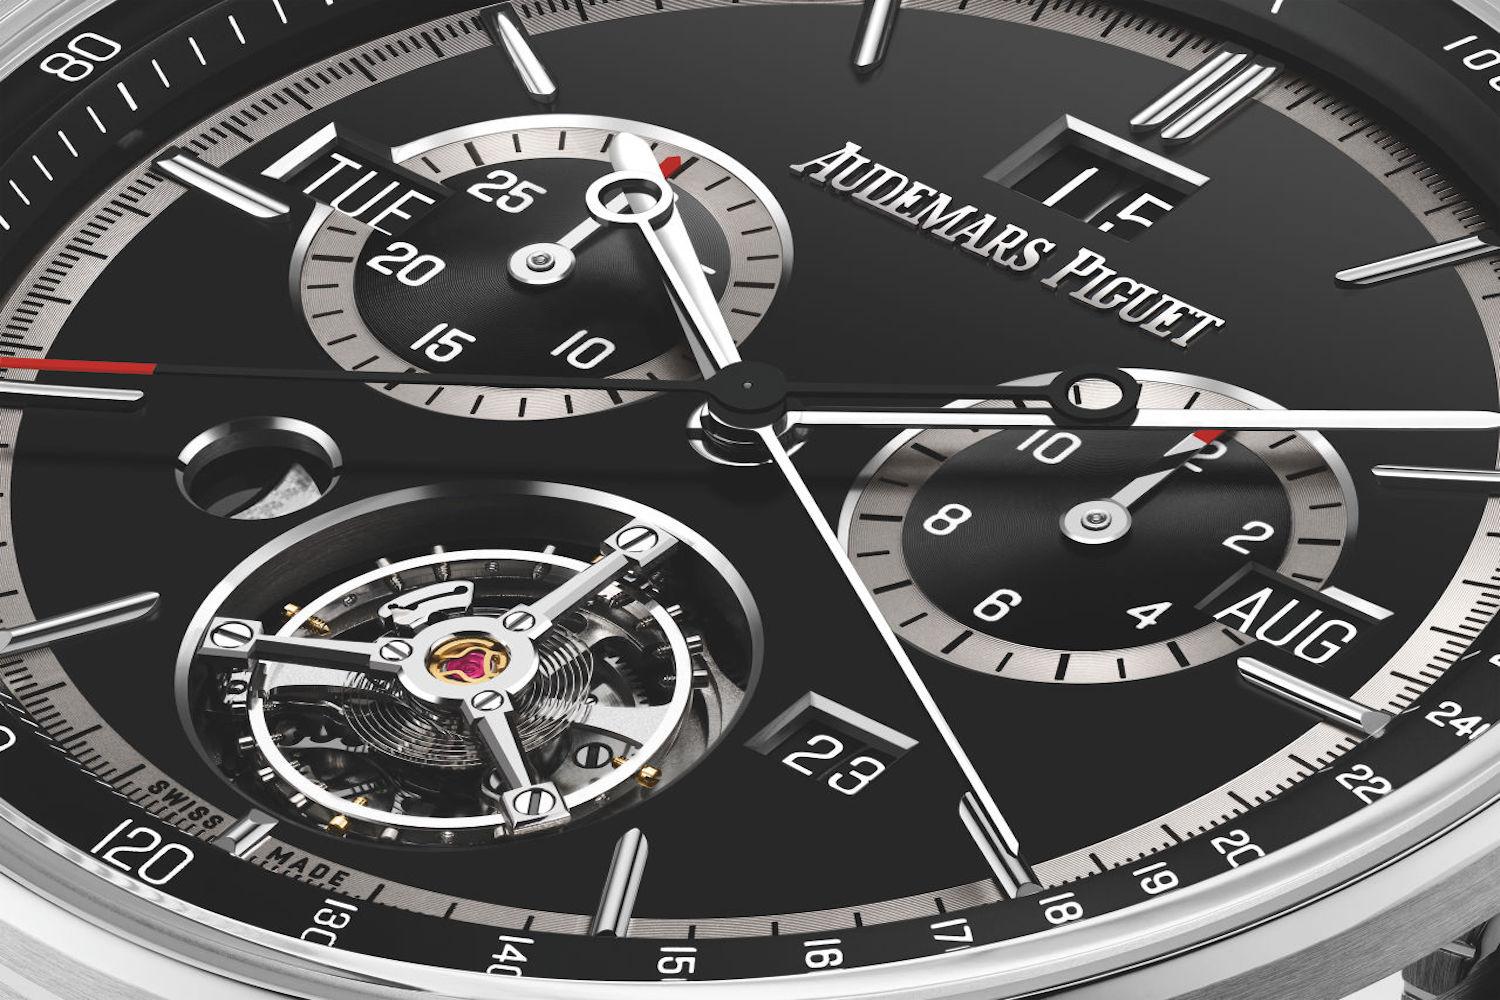 Audemars Piguet Release Their Most Complicated Watch Ever – As Well As Other Exciting Goodies